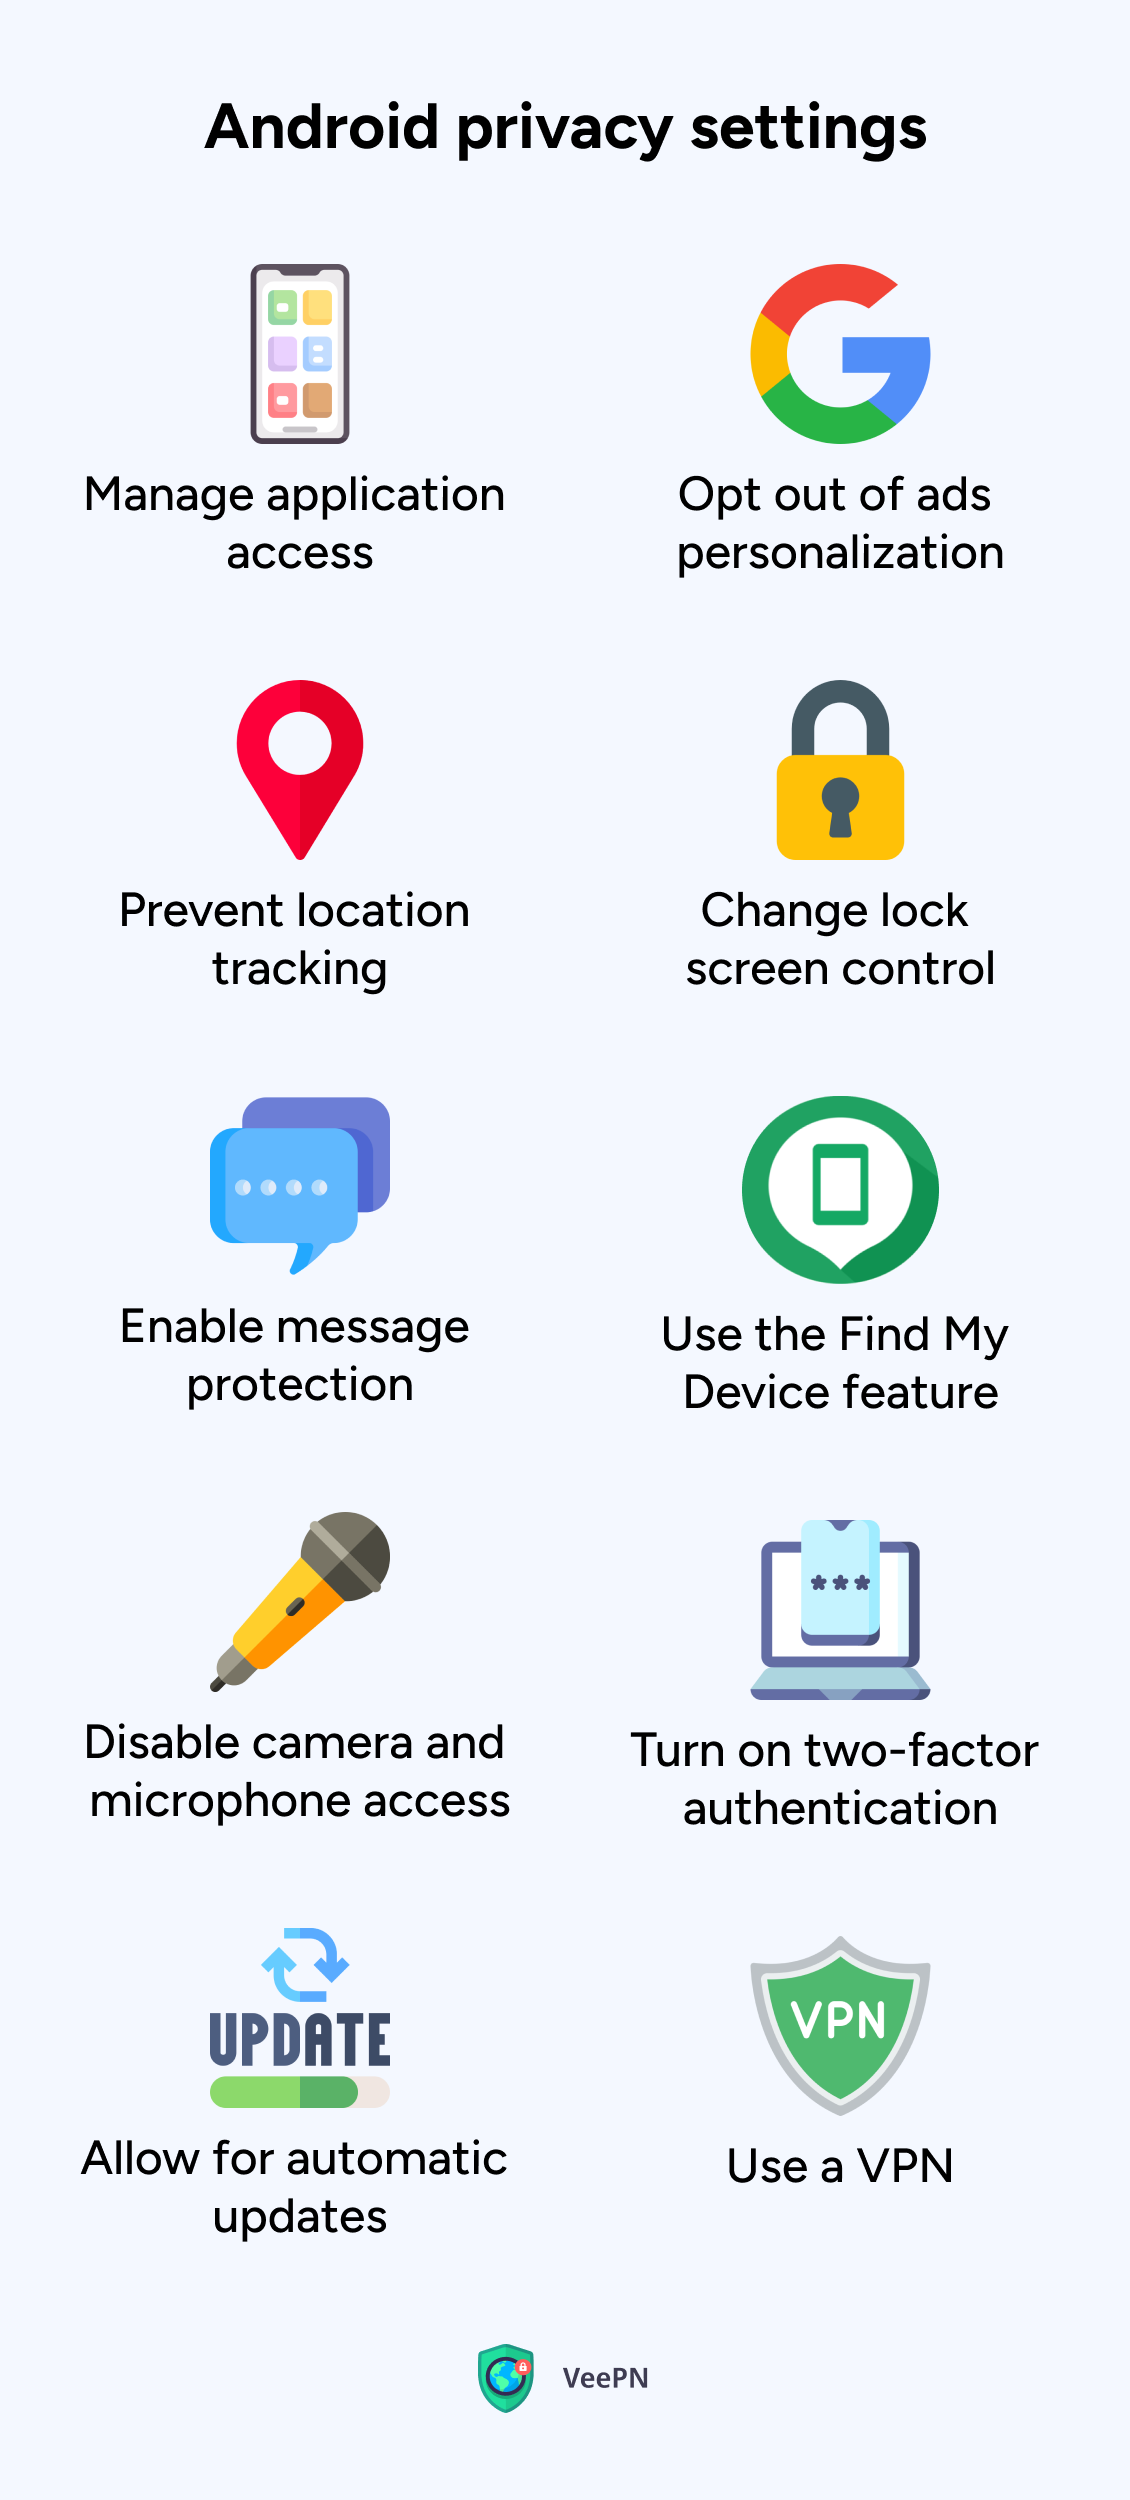 The key Android privacy settings